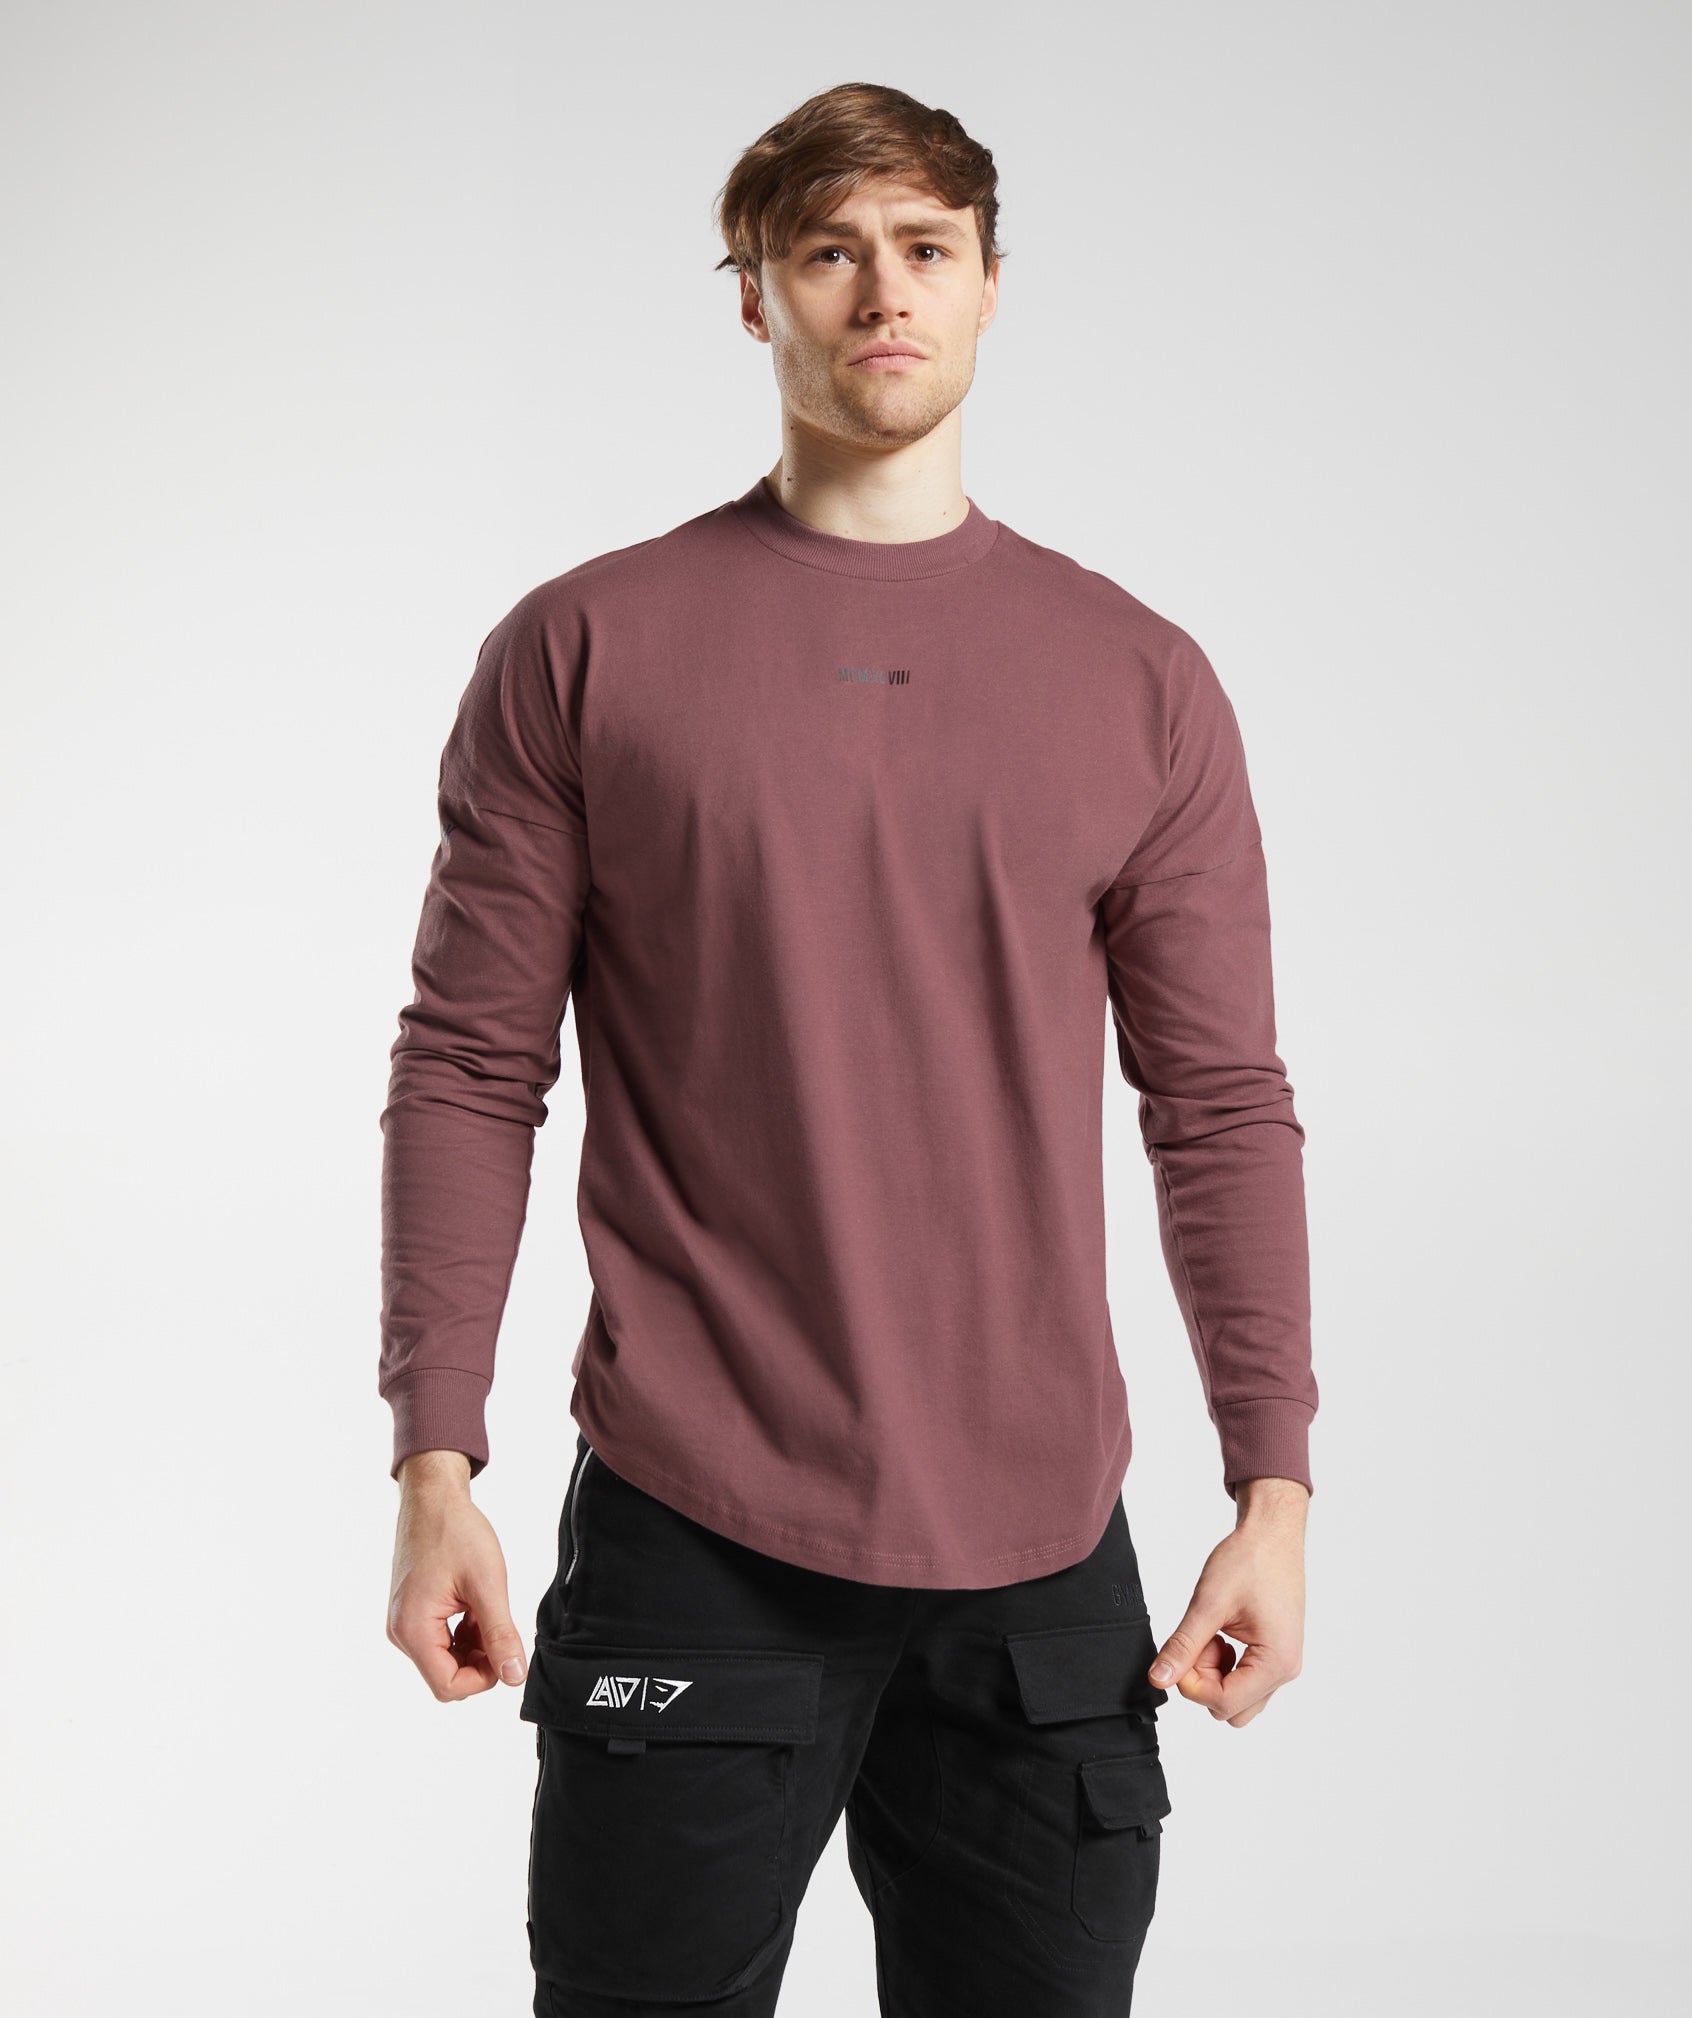 GS x David Laid Oversized Long Sleeve T-Shirt in Magenta Brown - view 1